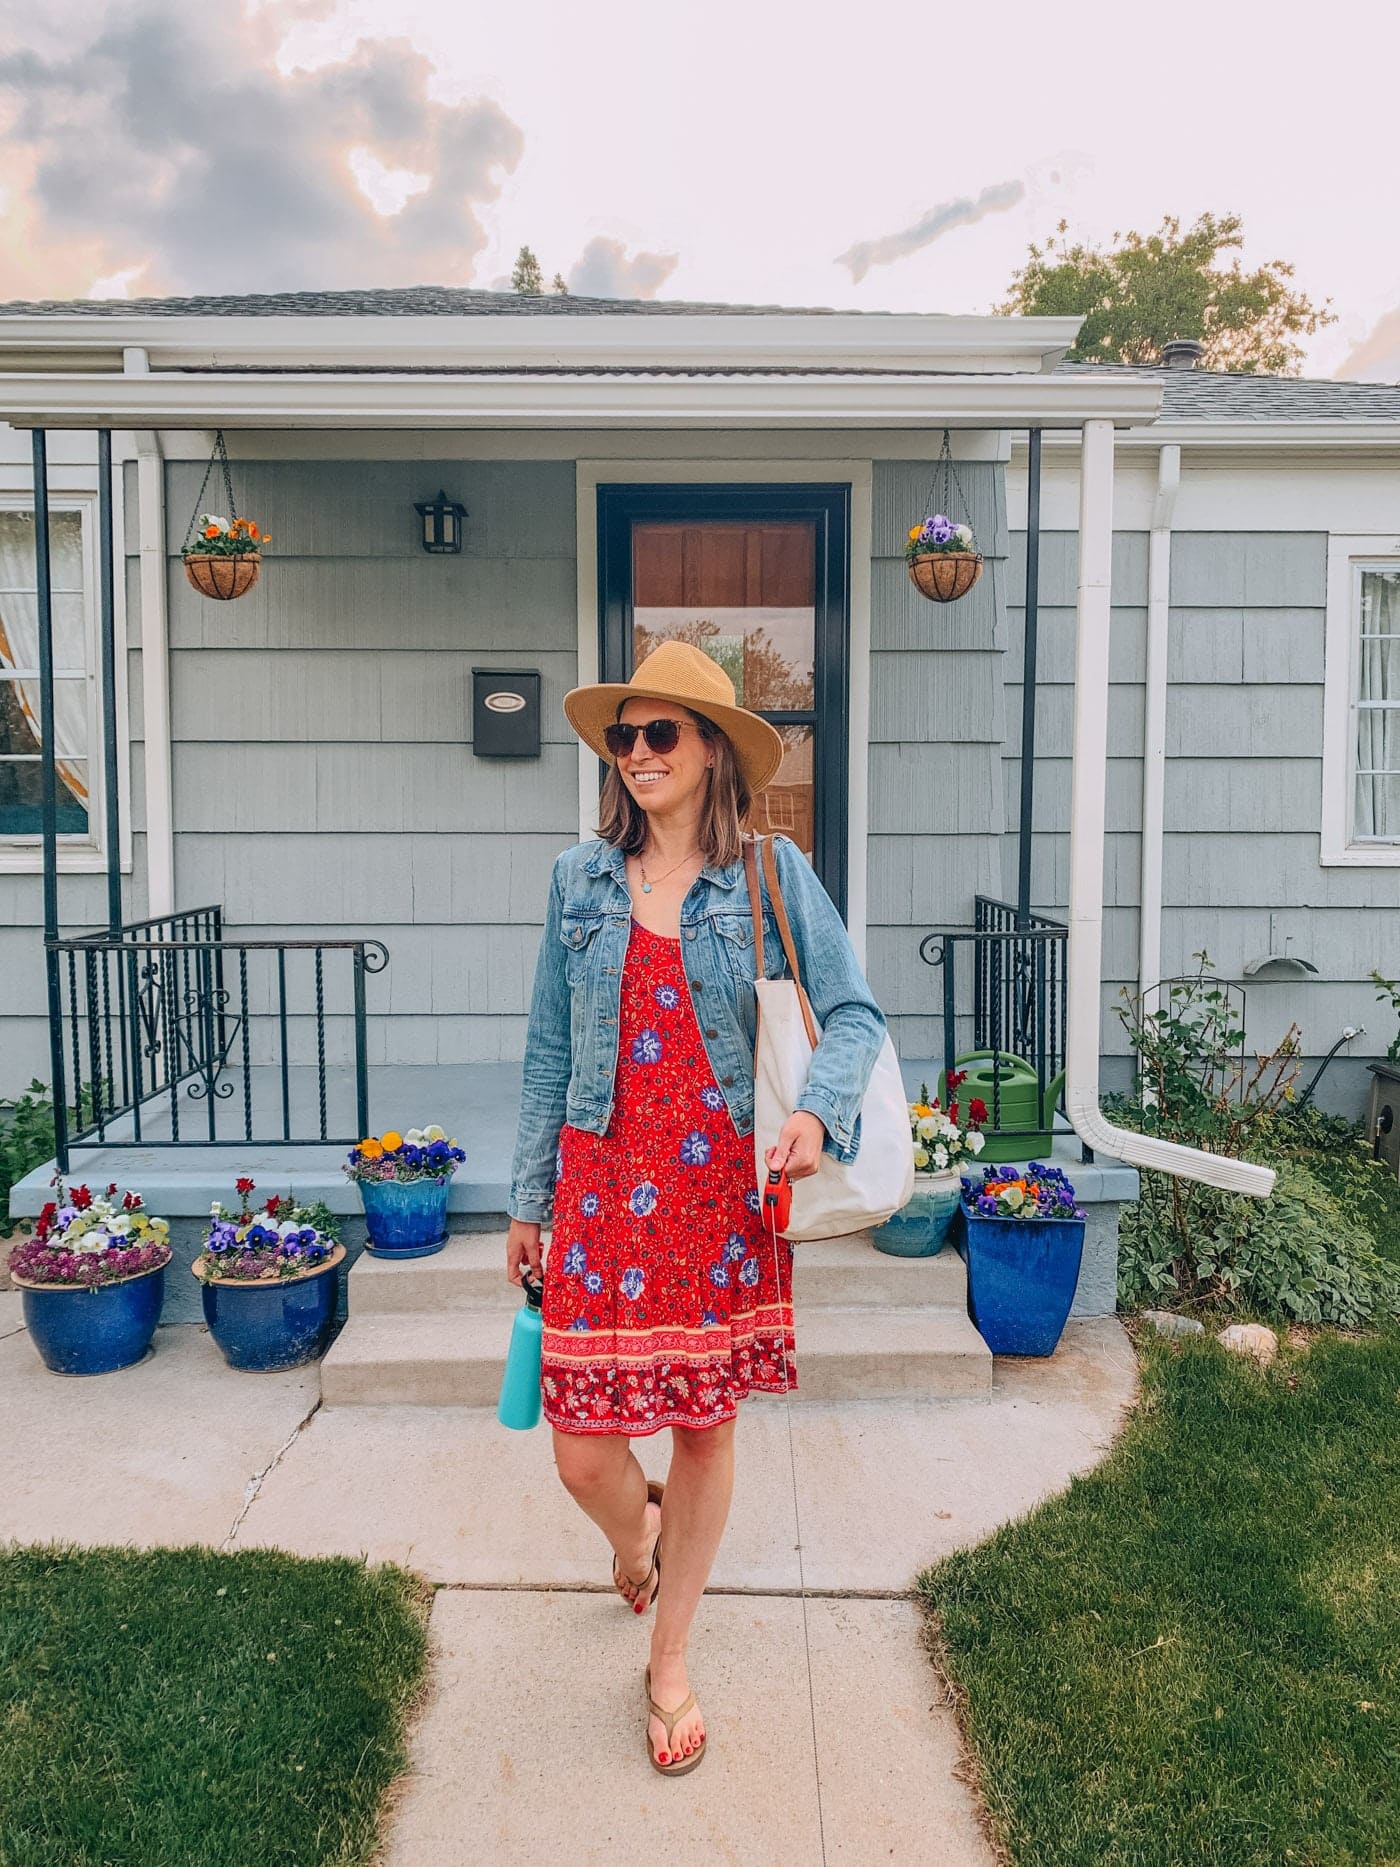 Wearing a Red floral sundress with jean jacket and wide brim hat